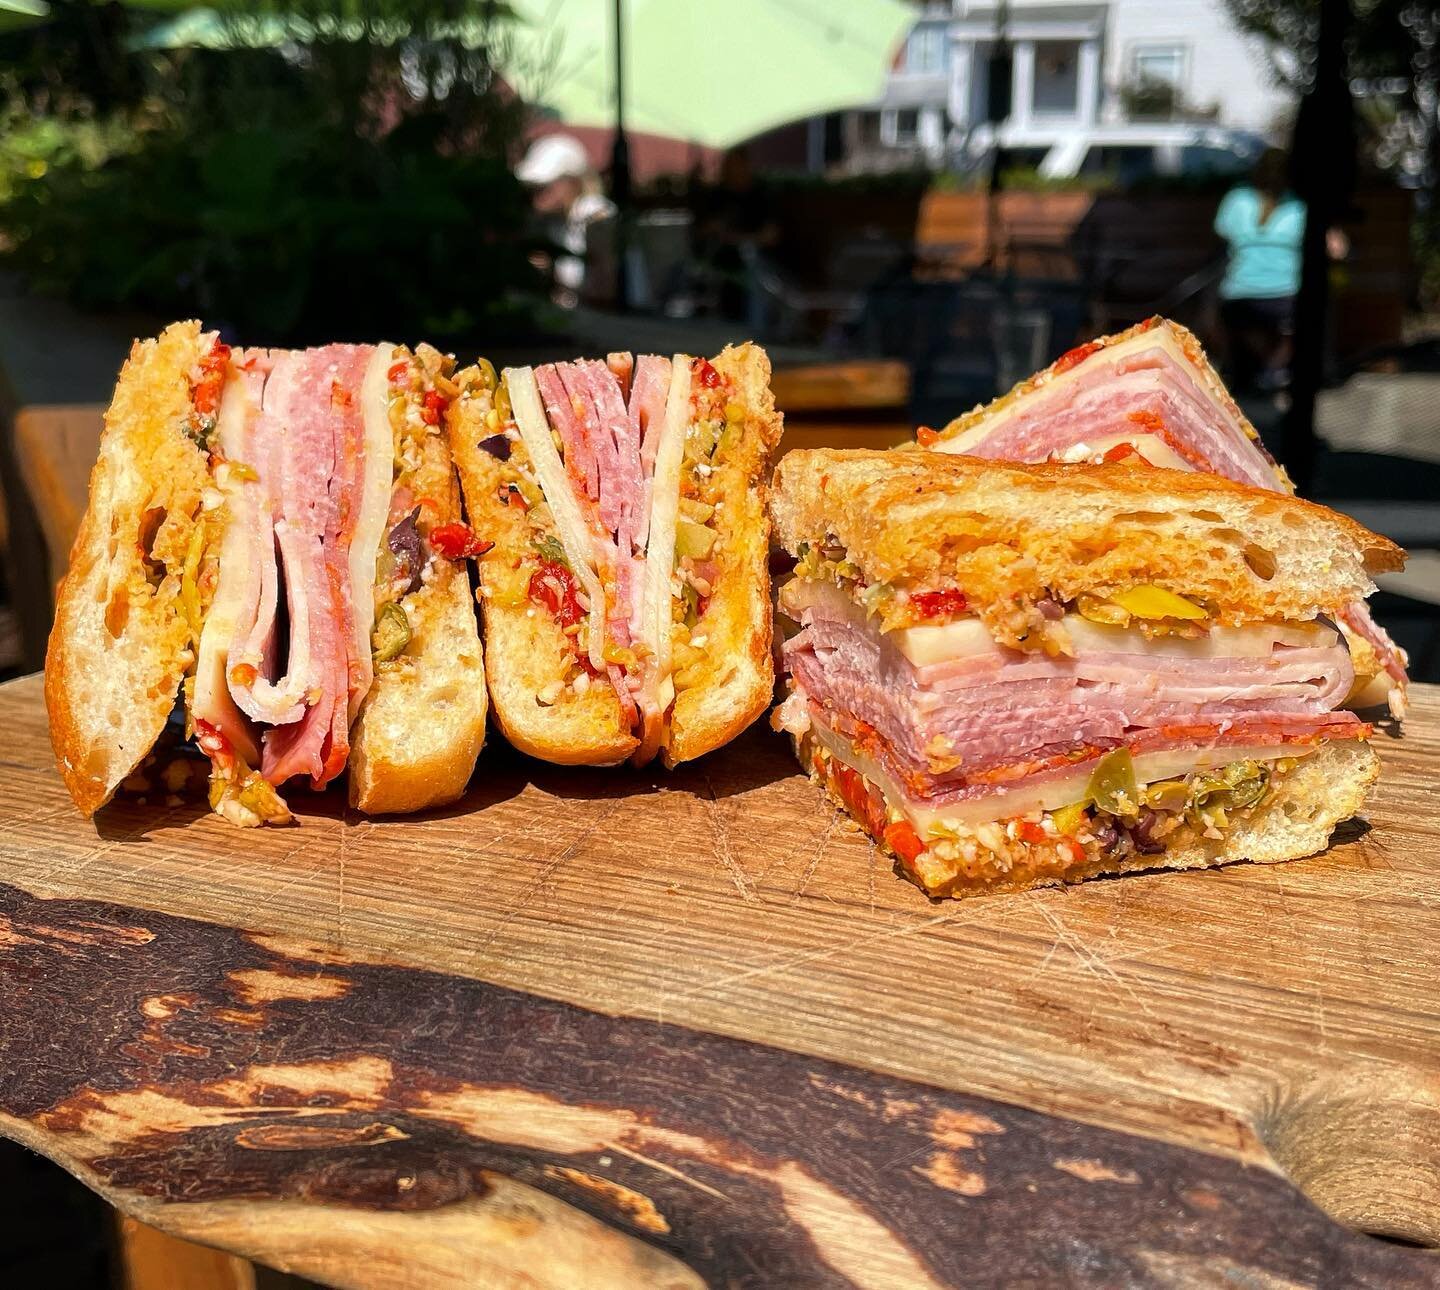 Today&rsquo;s special is the Muffuletta with olive salad, provolone, genoa, ham and capicola on ciabatta!  Soups of the moment are vegetarian/gf Spicy Tomato Basil or Chicken Noodle and our seasonal side is Summer Veggie Salad!
&bull;&bull;&bull;
#da